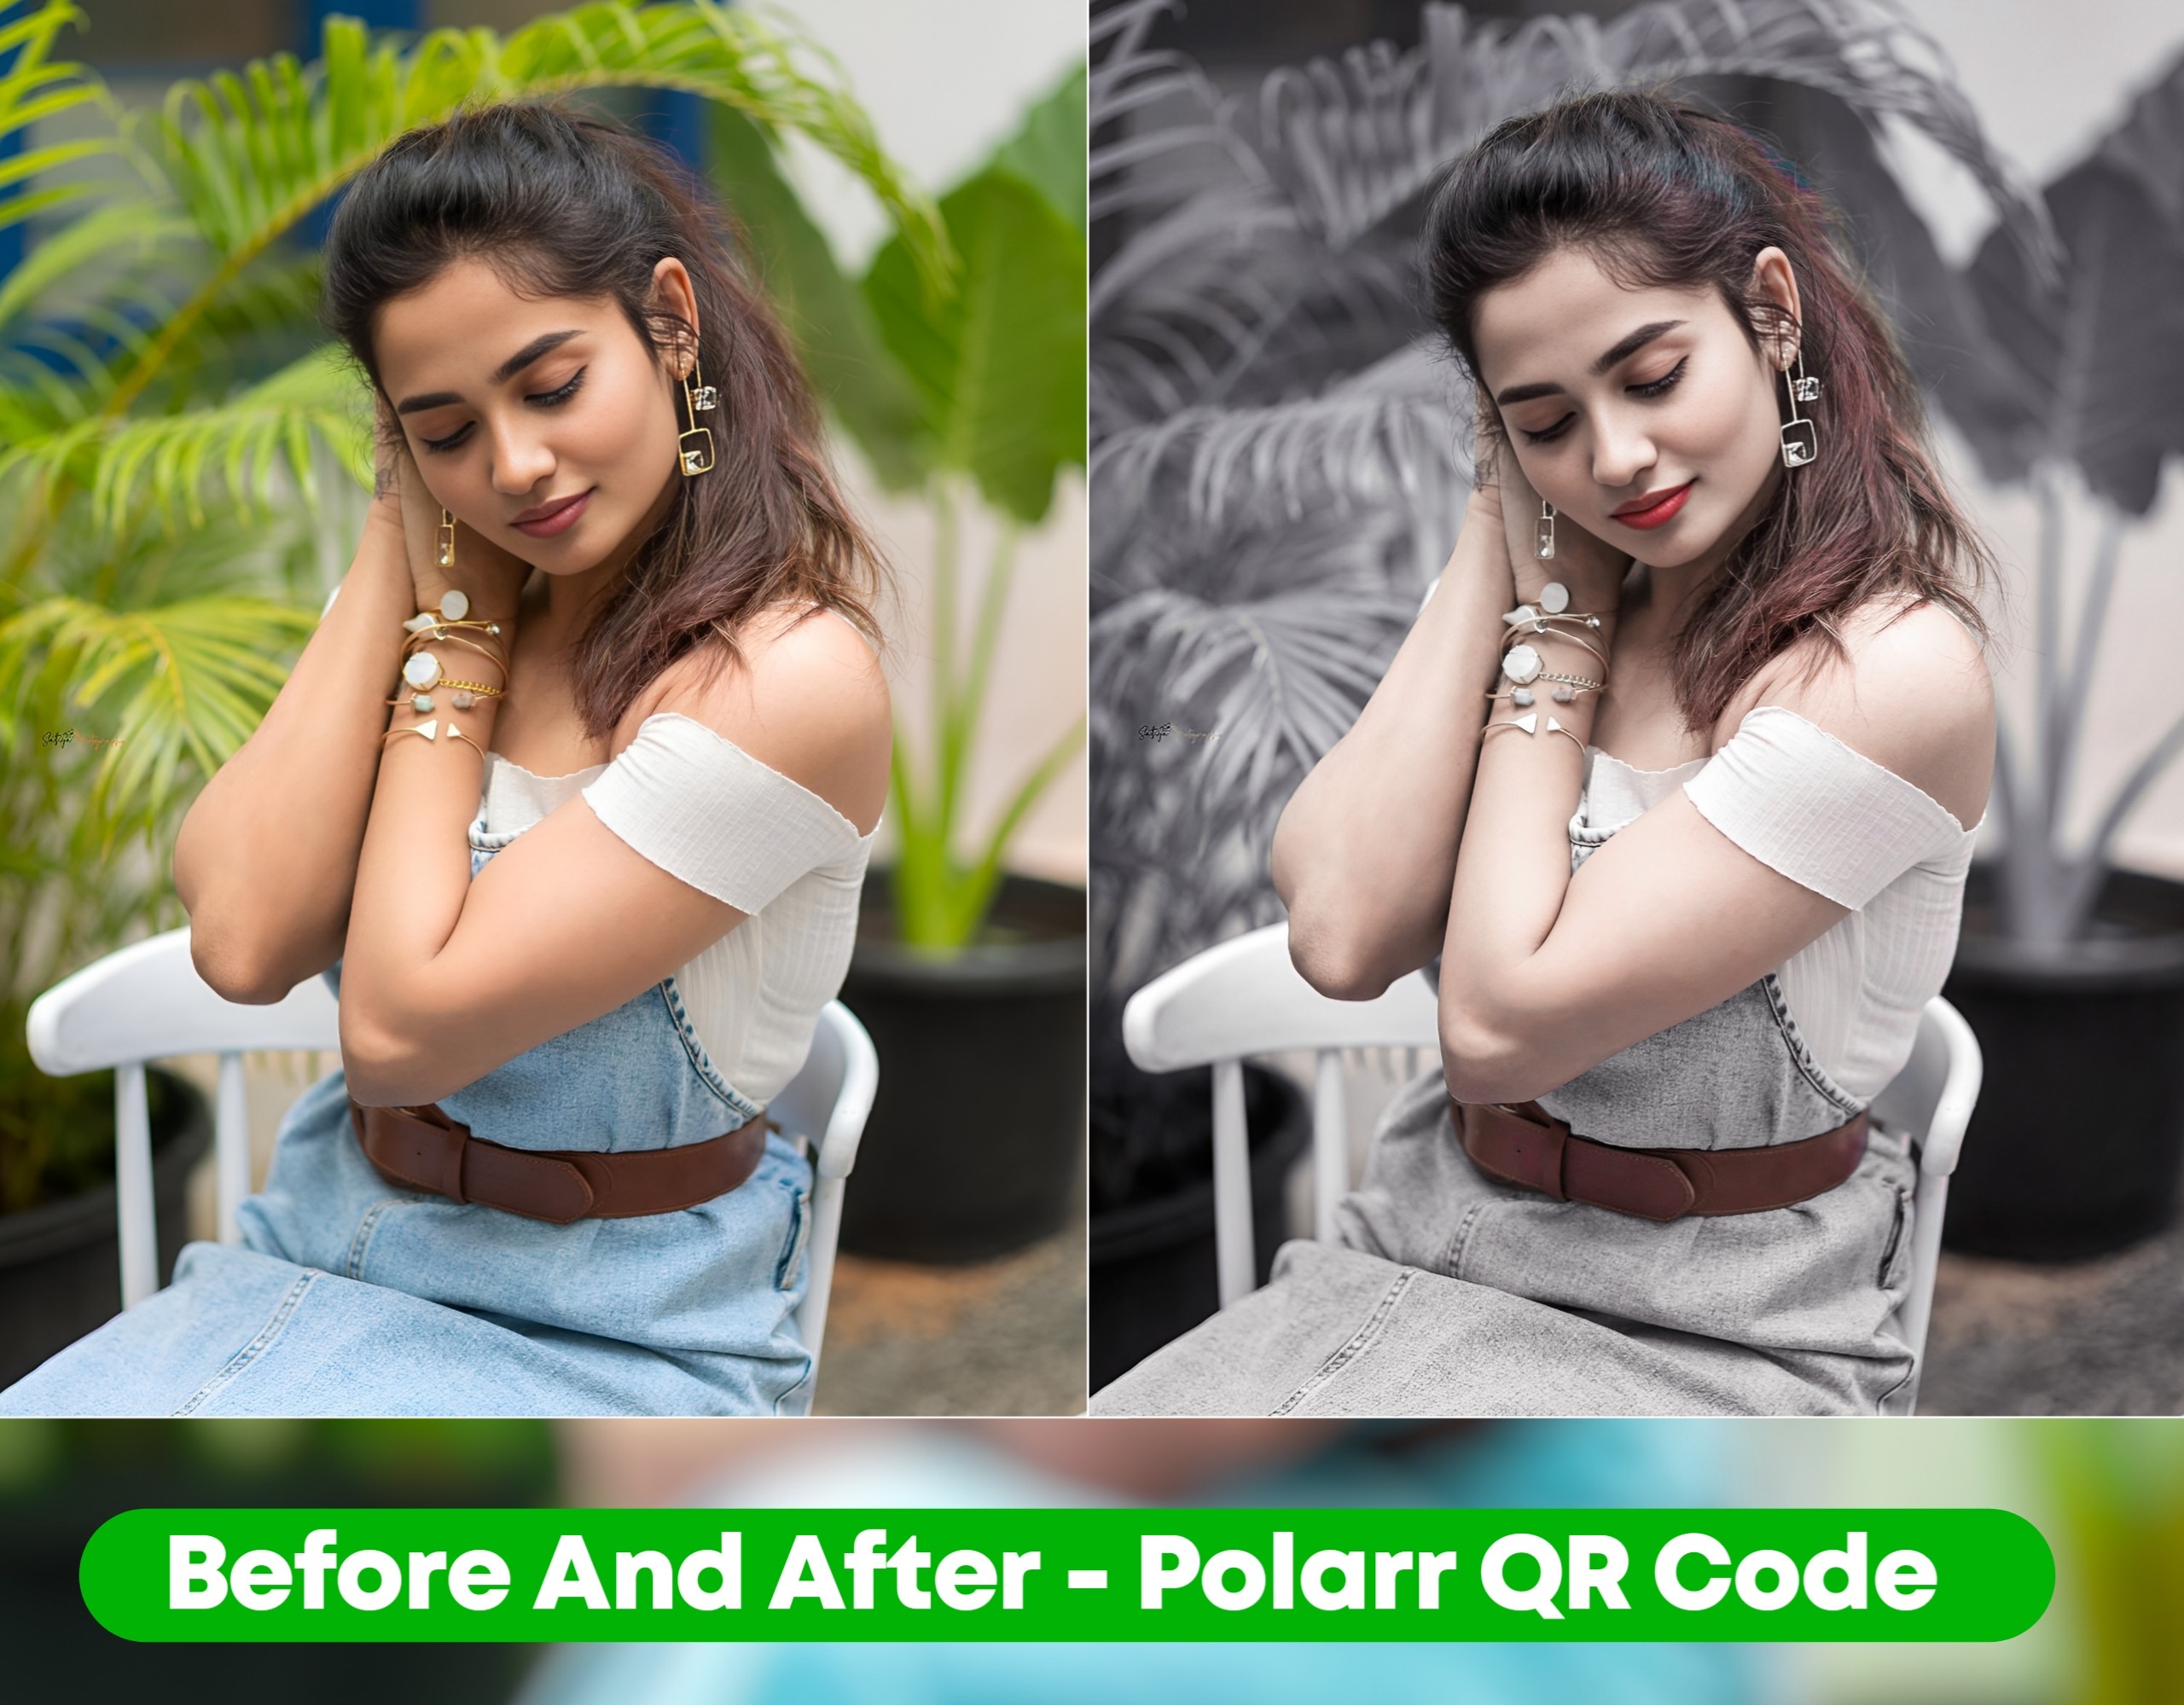 Before And After - Polarr QR Code Photo Editing 